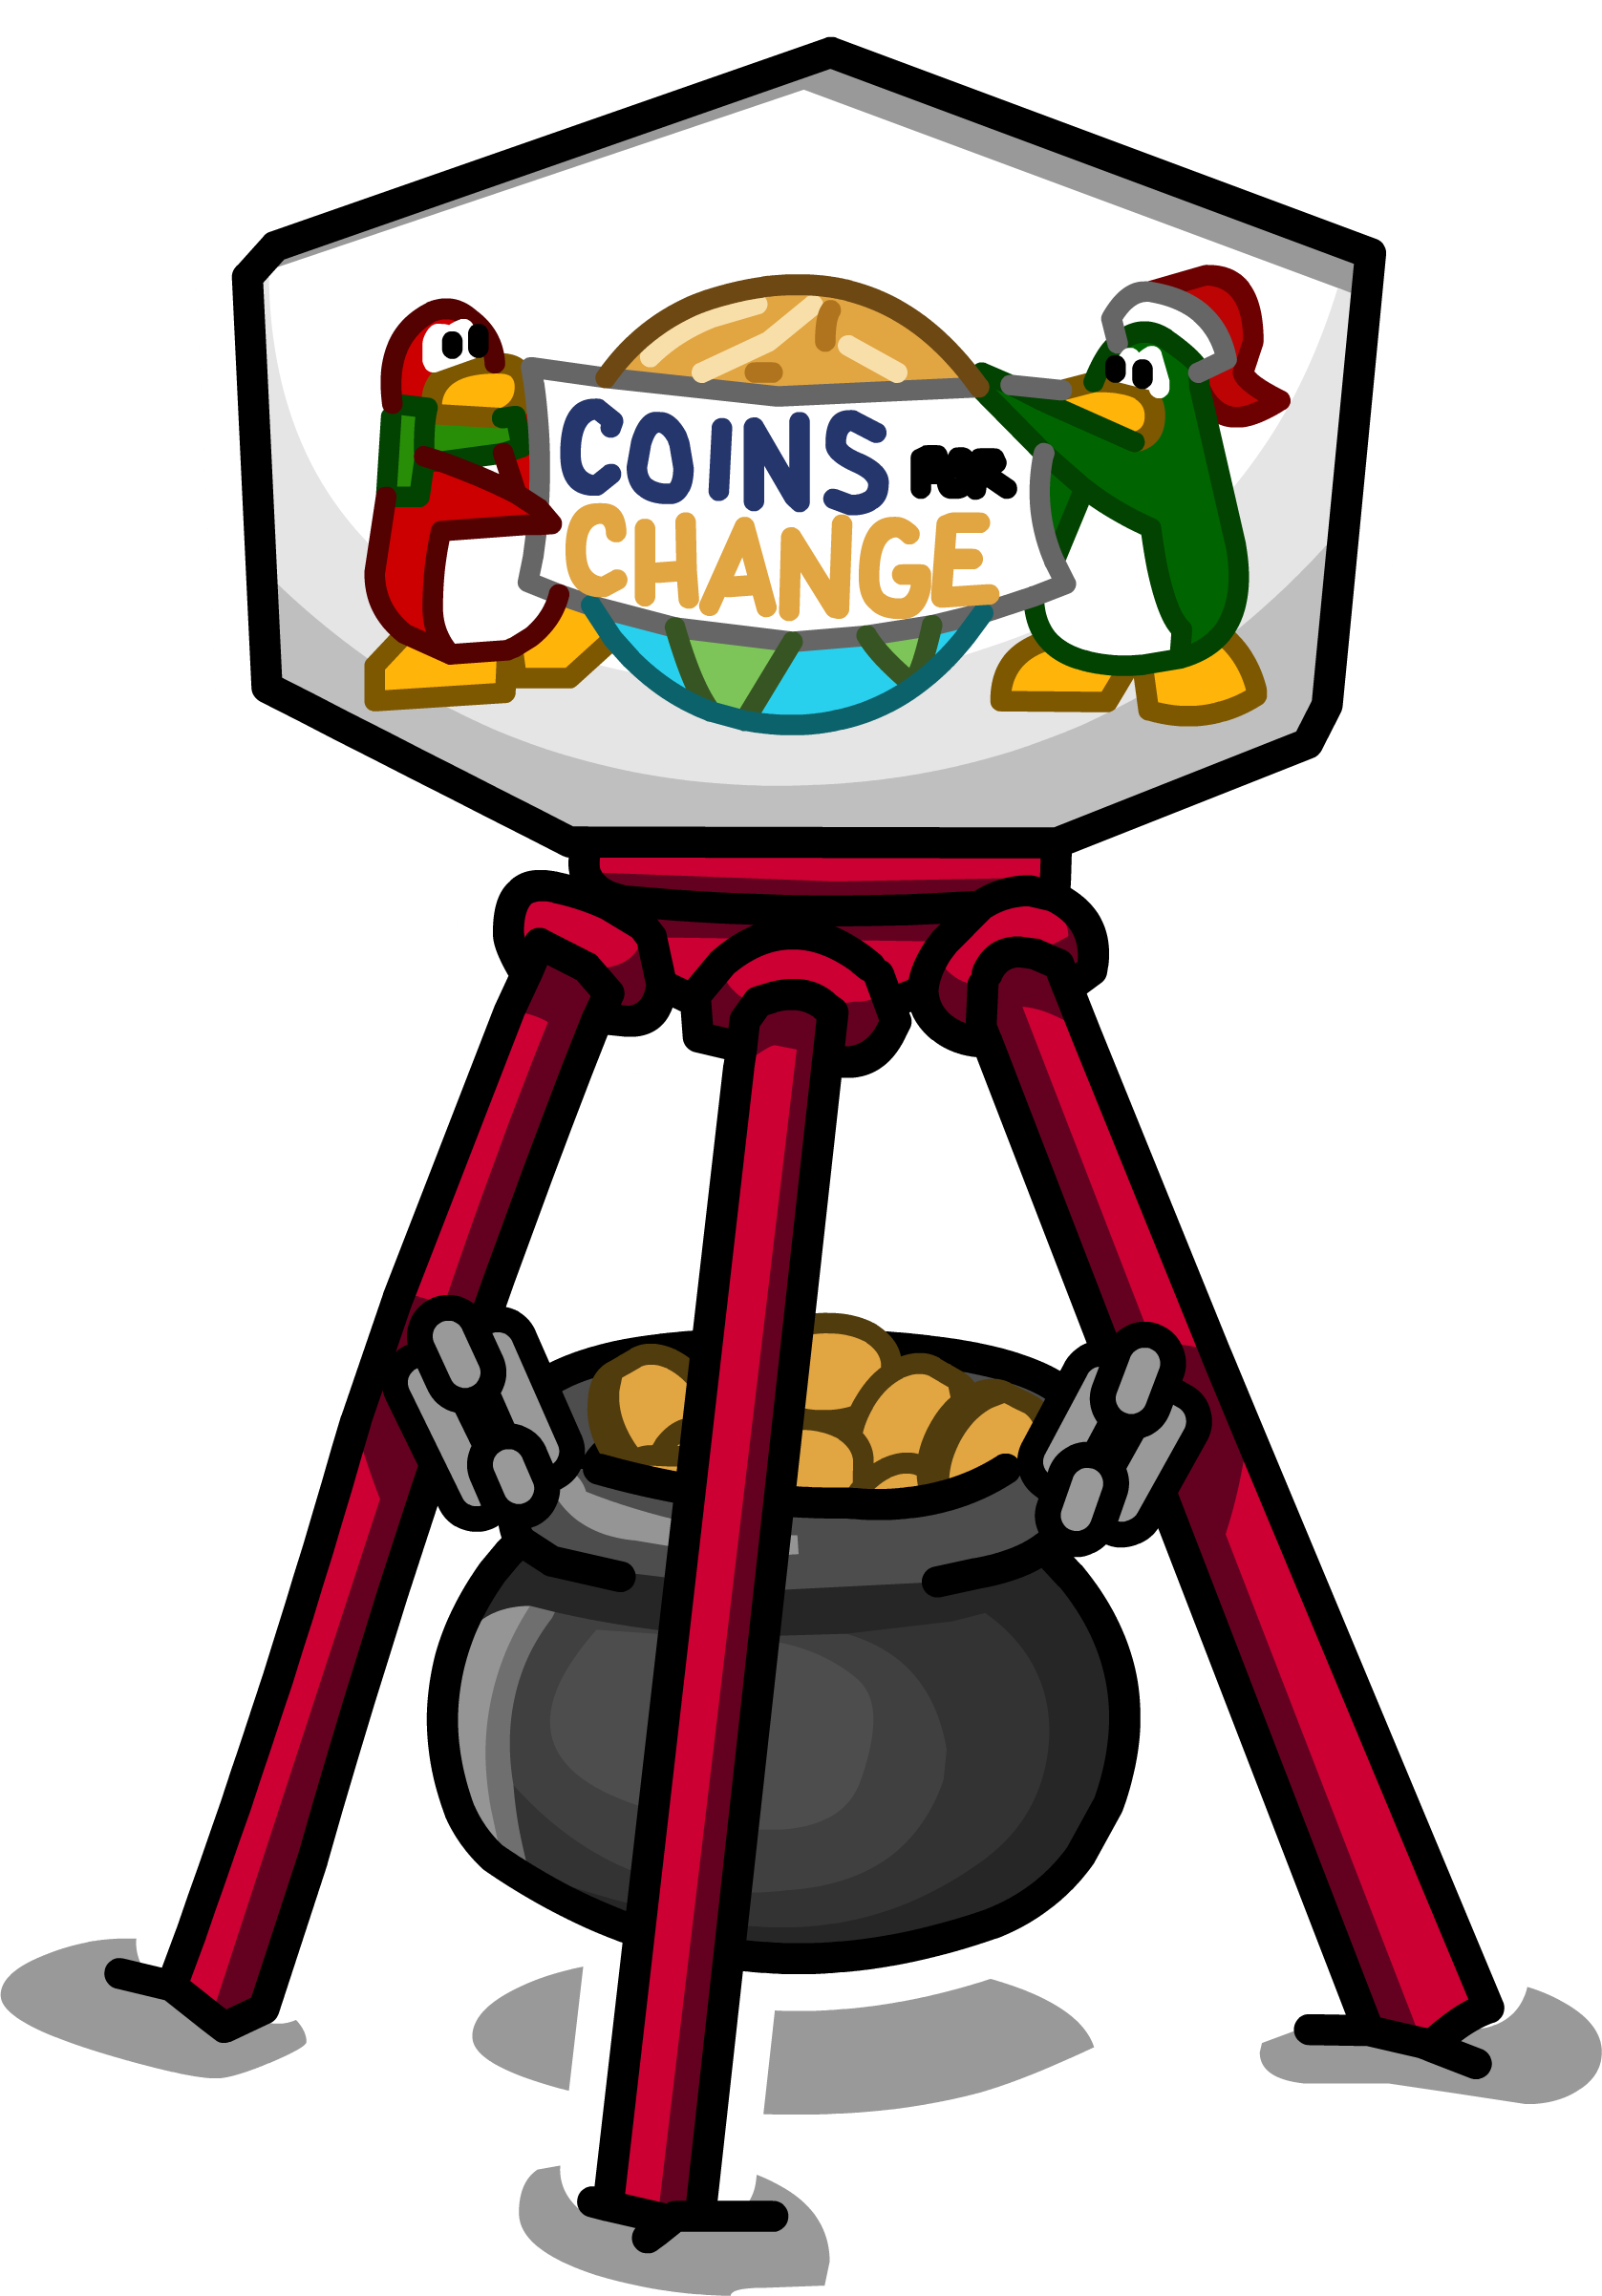 Coins For Change Donation Station Sprite 001 Hover - Club Penguin Coins For Change (1677x2404)